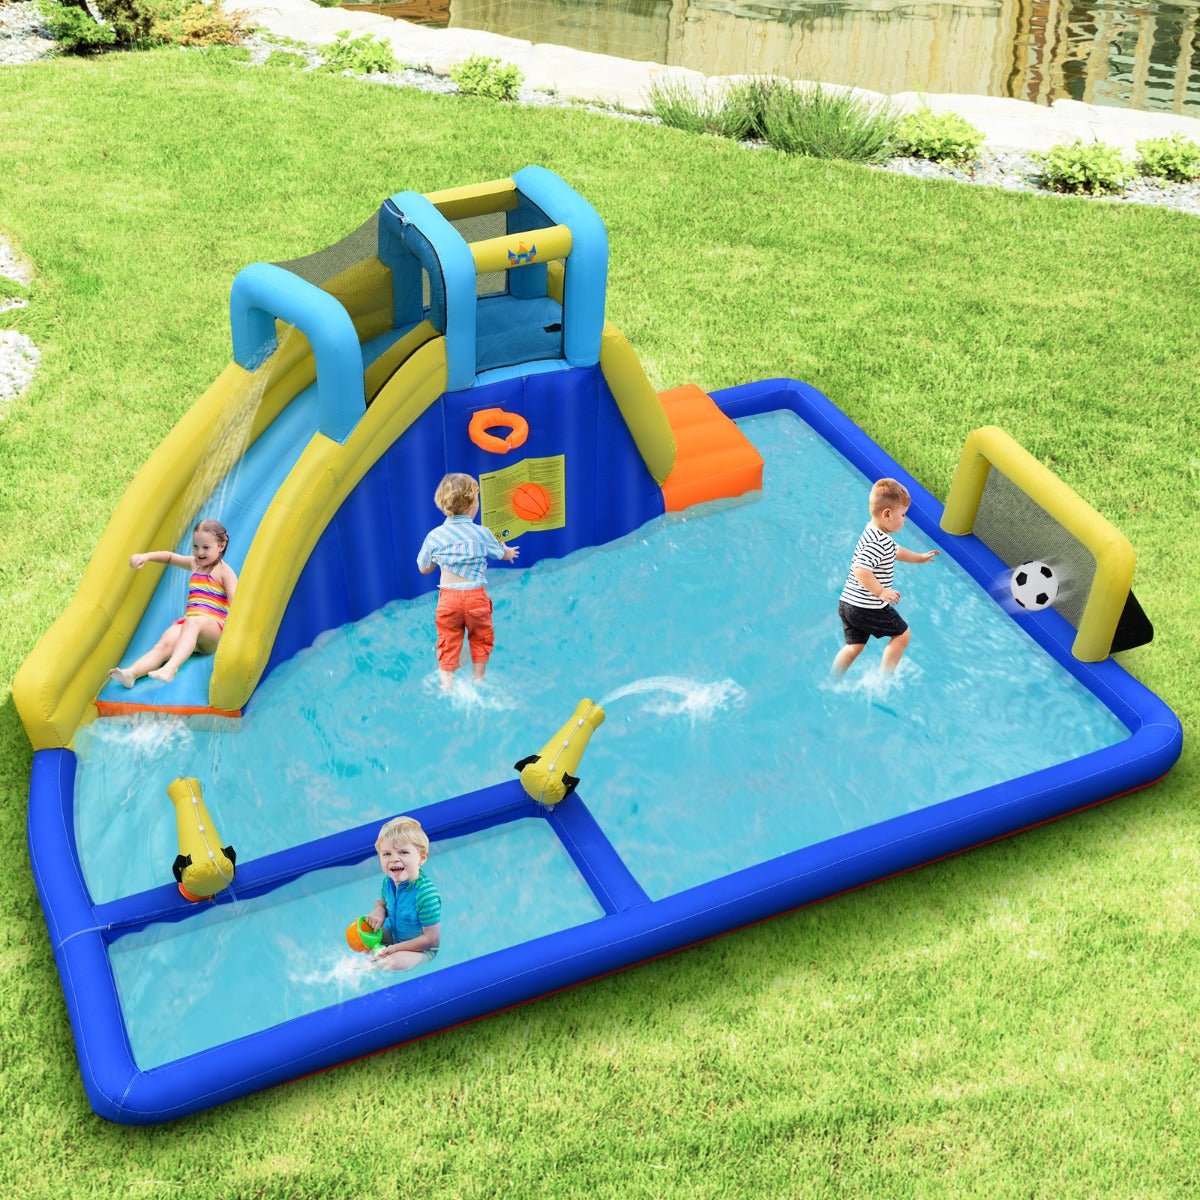 Water Jumping Castle with Slide - Outdoor Fun and Cooling Water Play